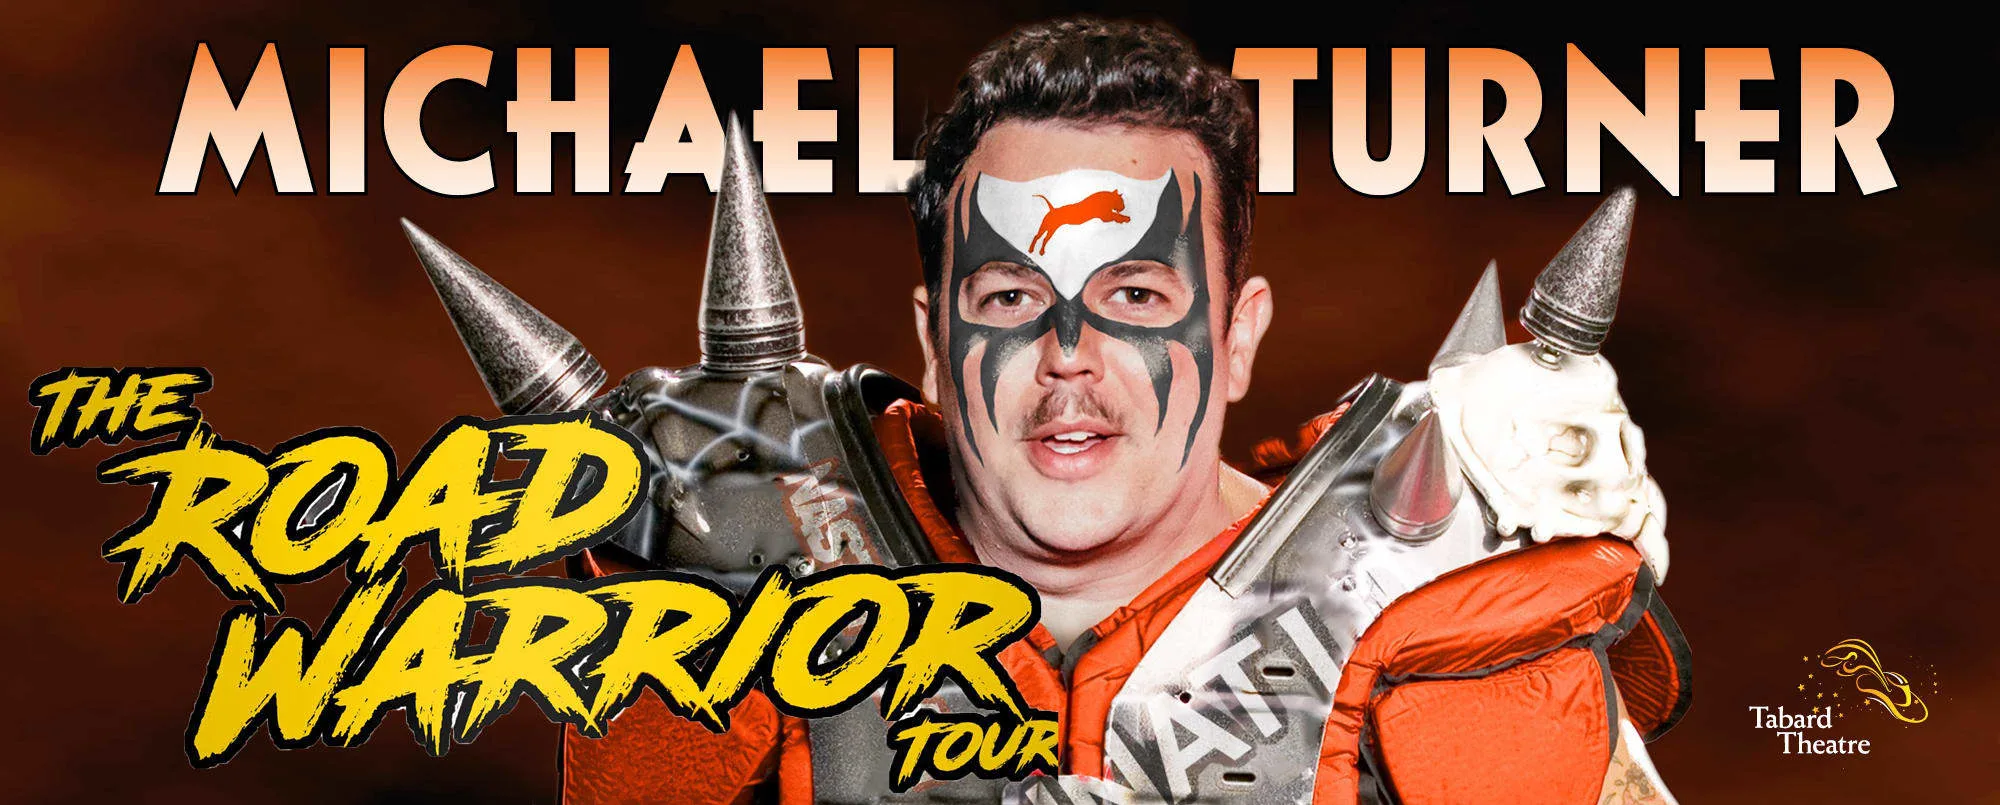 Michael Turner— The Road Warrior Tour